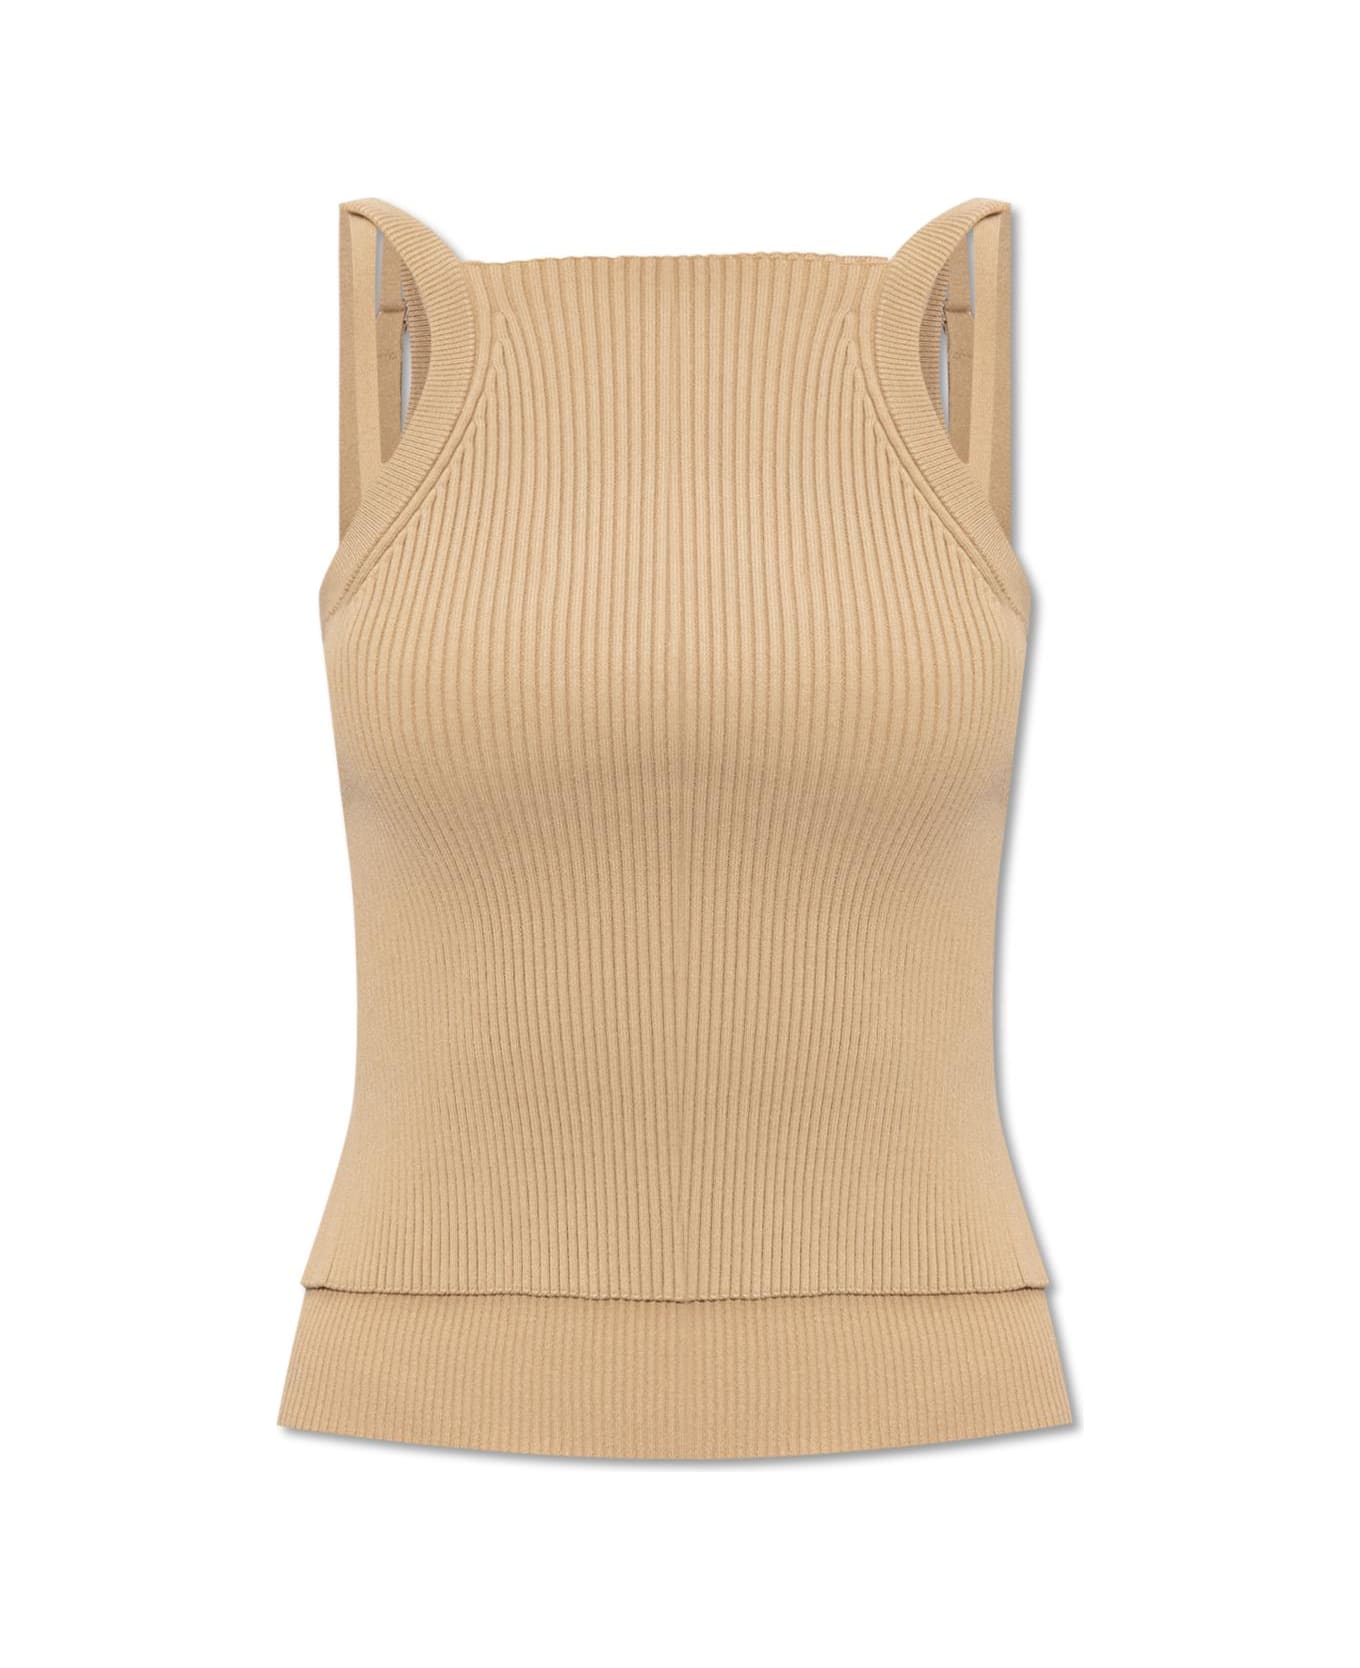 Emporio Armani Top From The 'sustainability' Collection - Brown